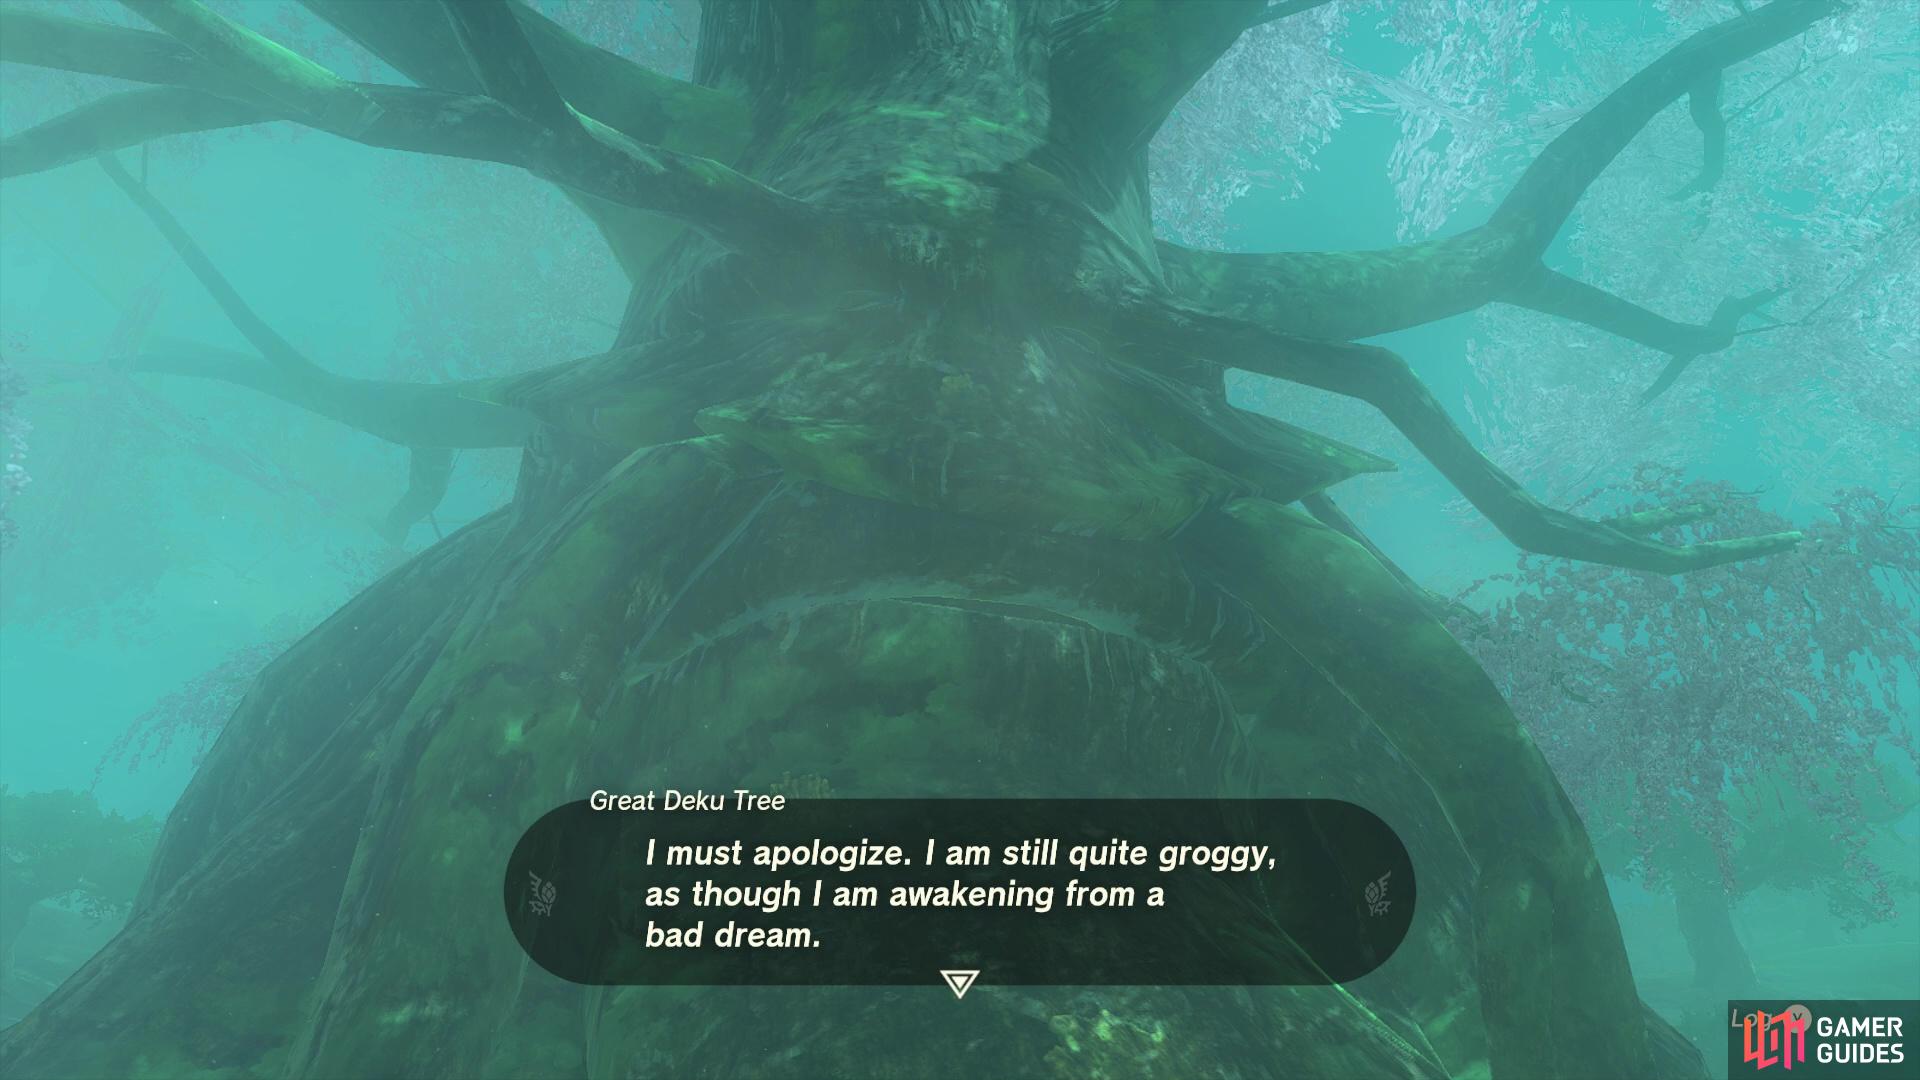 Speak with the Deku Tree to learn where to Master Sword is!